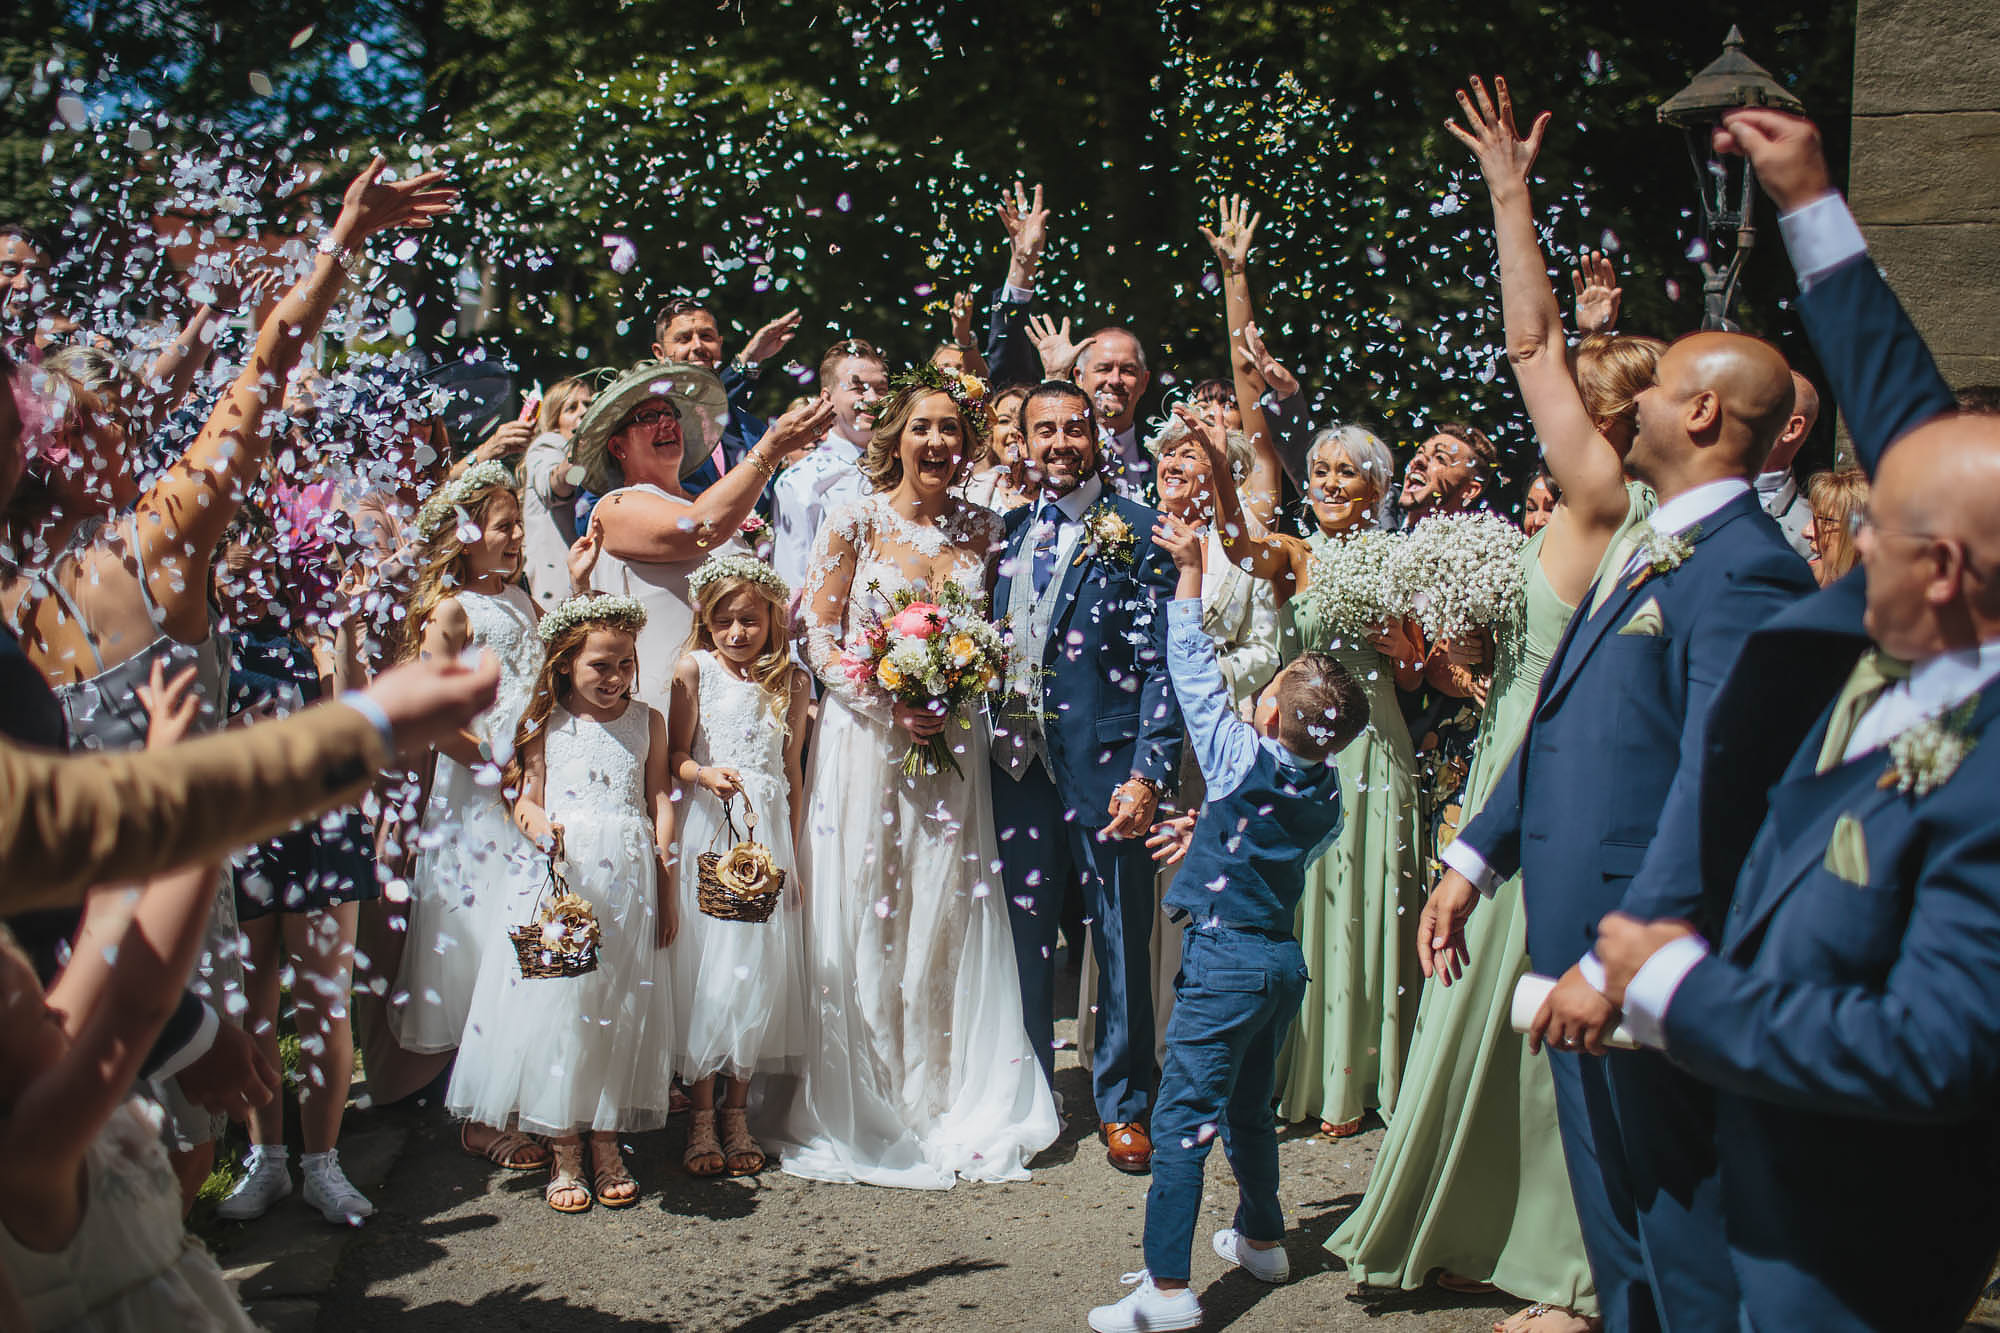 Wedding guests throw confetti over the bride and groom